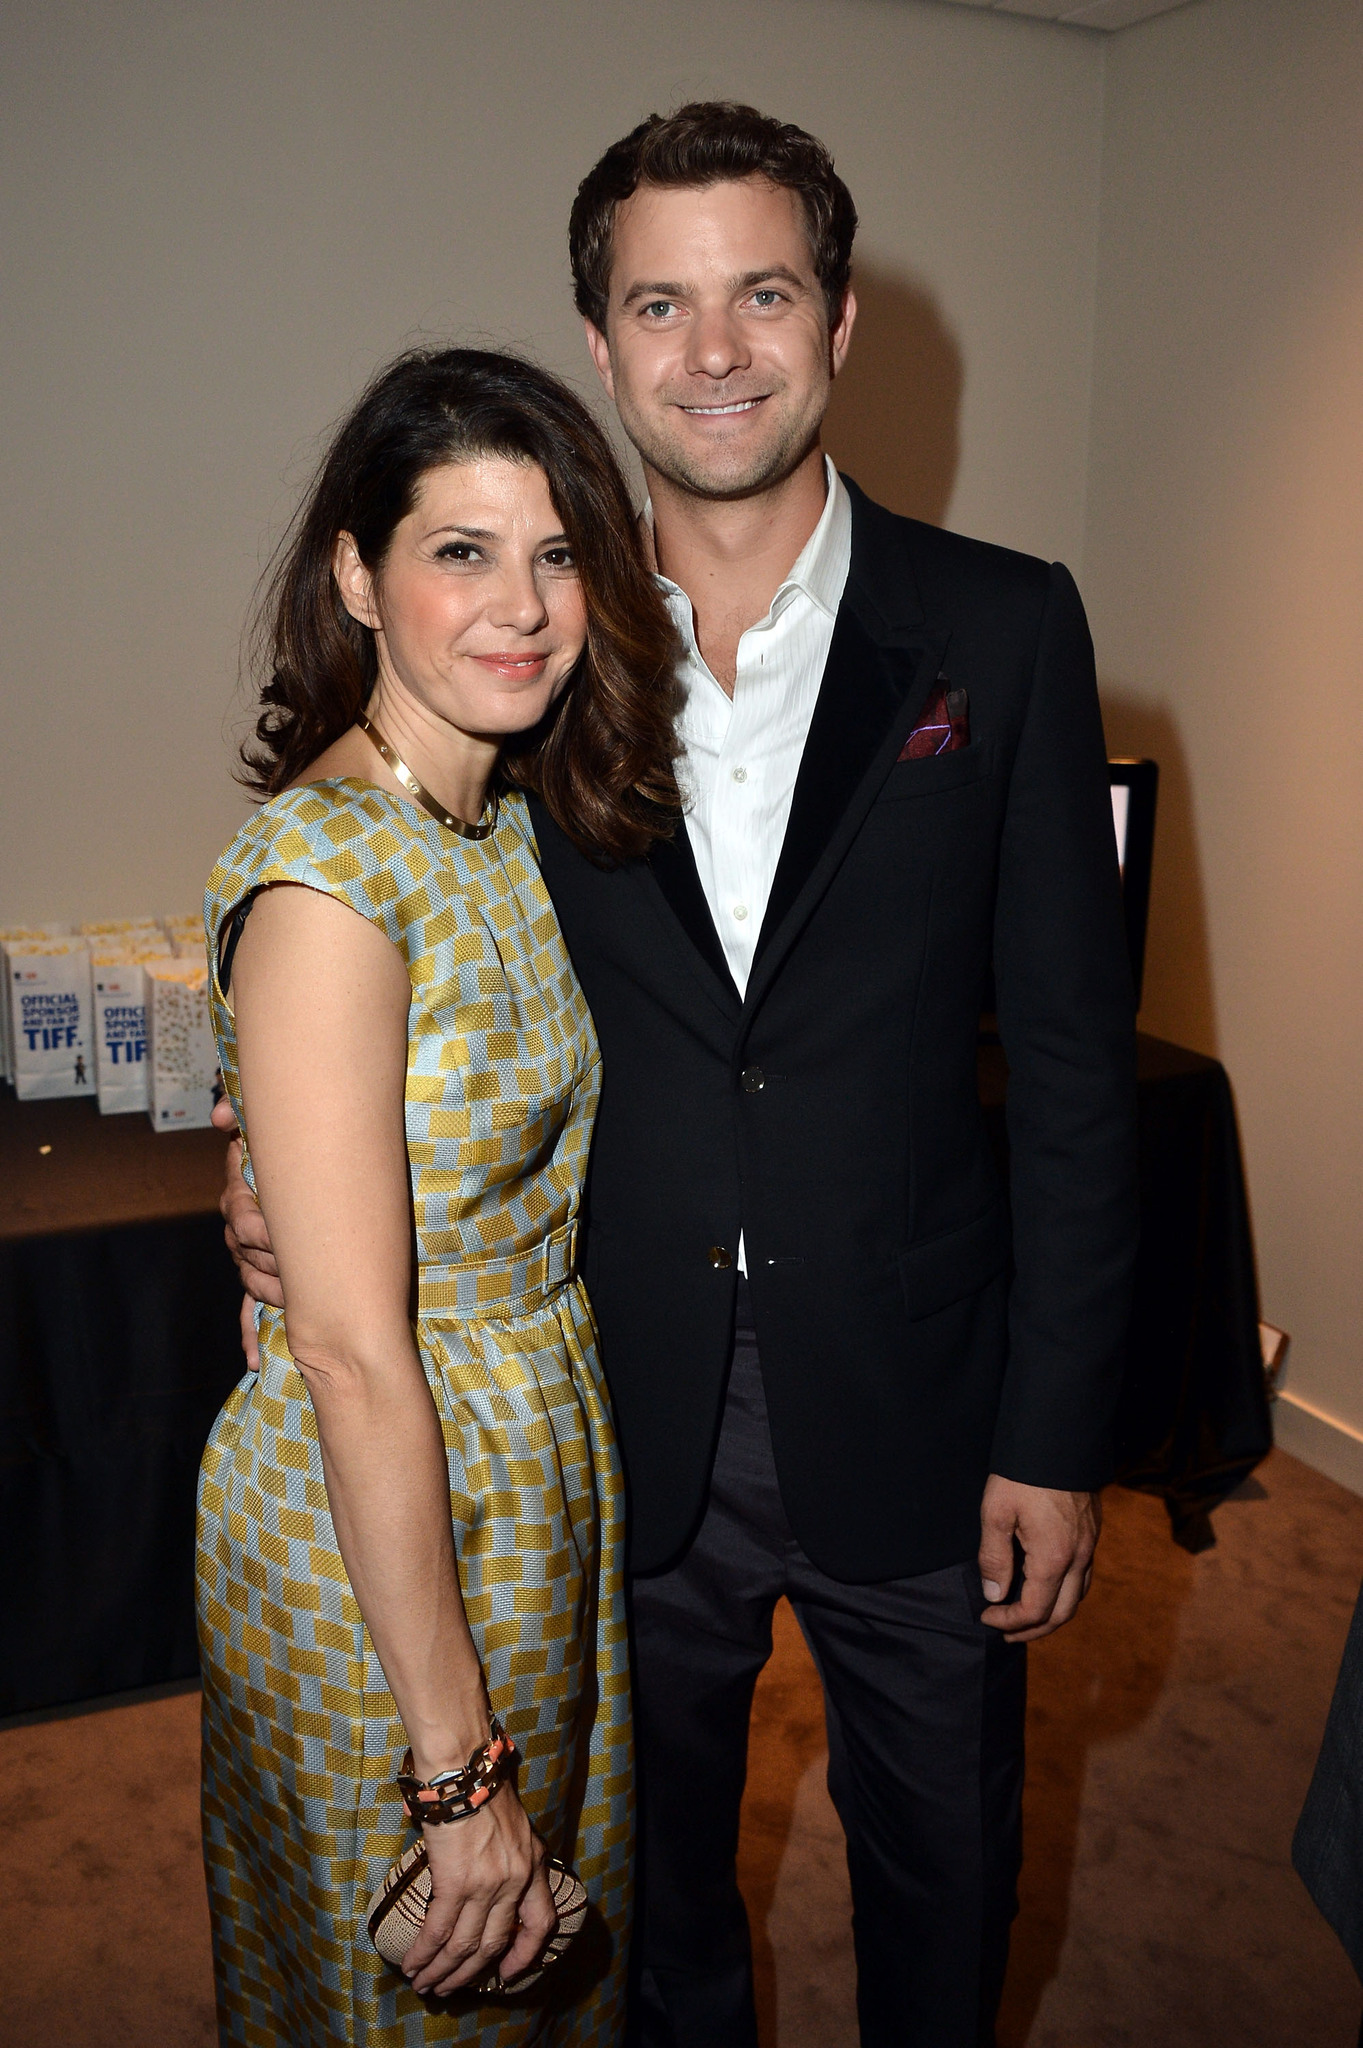 Marisa Tomei at event of Inescapable (2012)